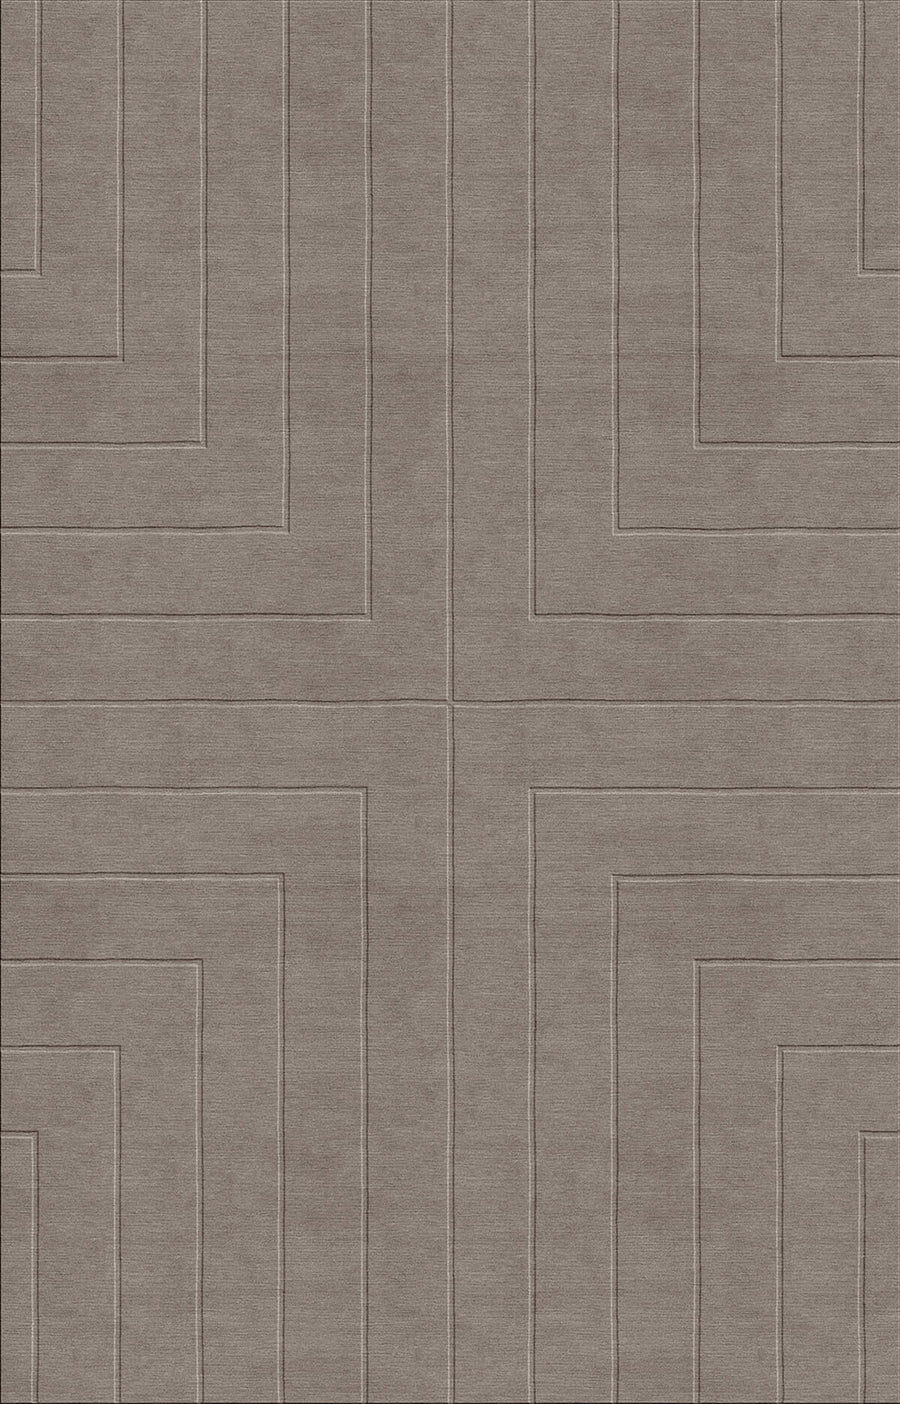 Luxury geometric relief rug by designer Jt/ Pfeiffer. Represented by Tuleste Factory in New York City.